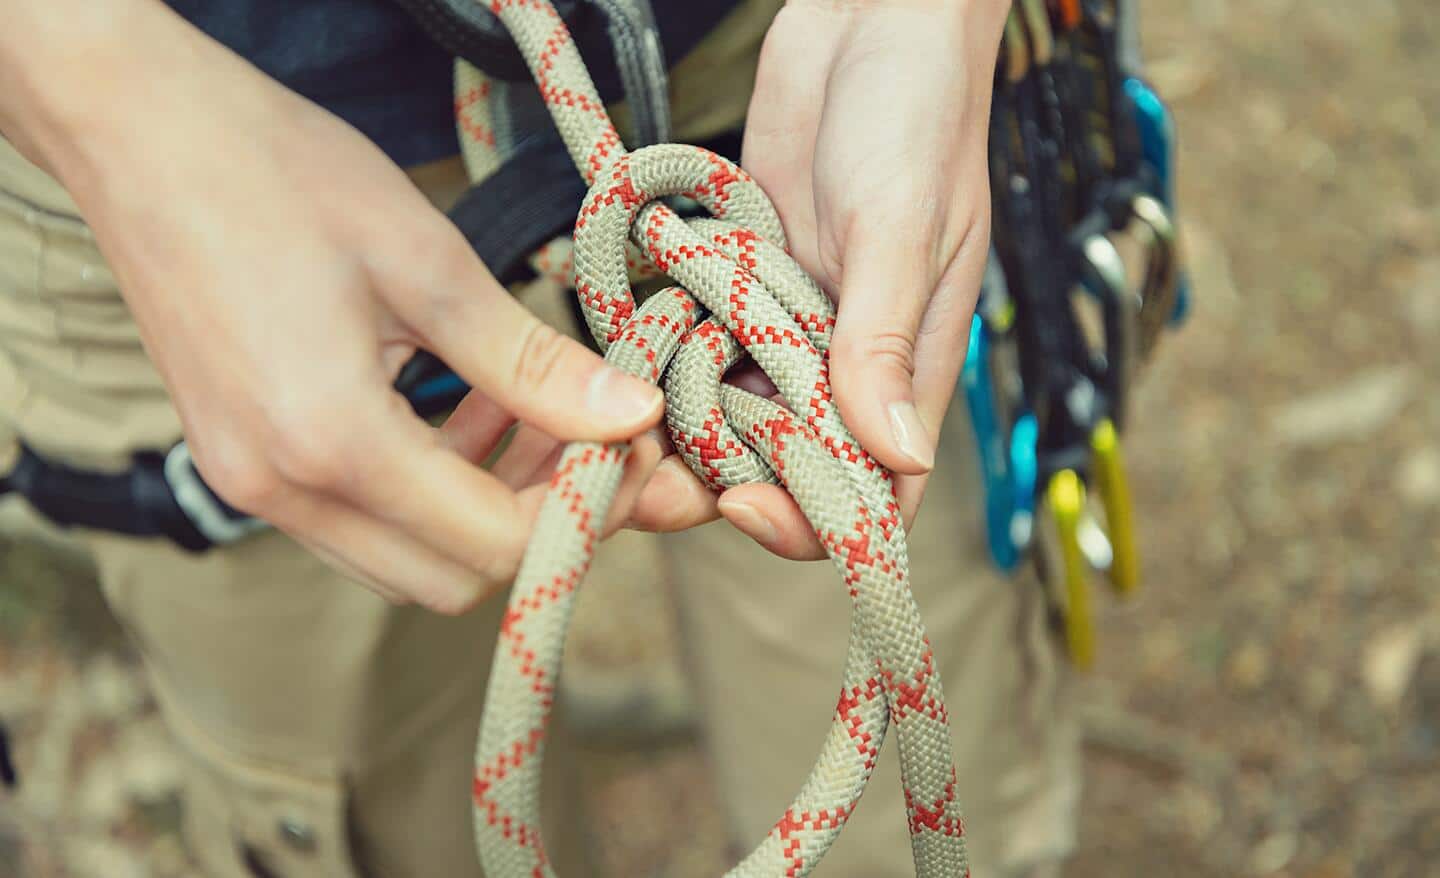 Different Types Of Ropes You Can Consider For Outdoor Use